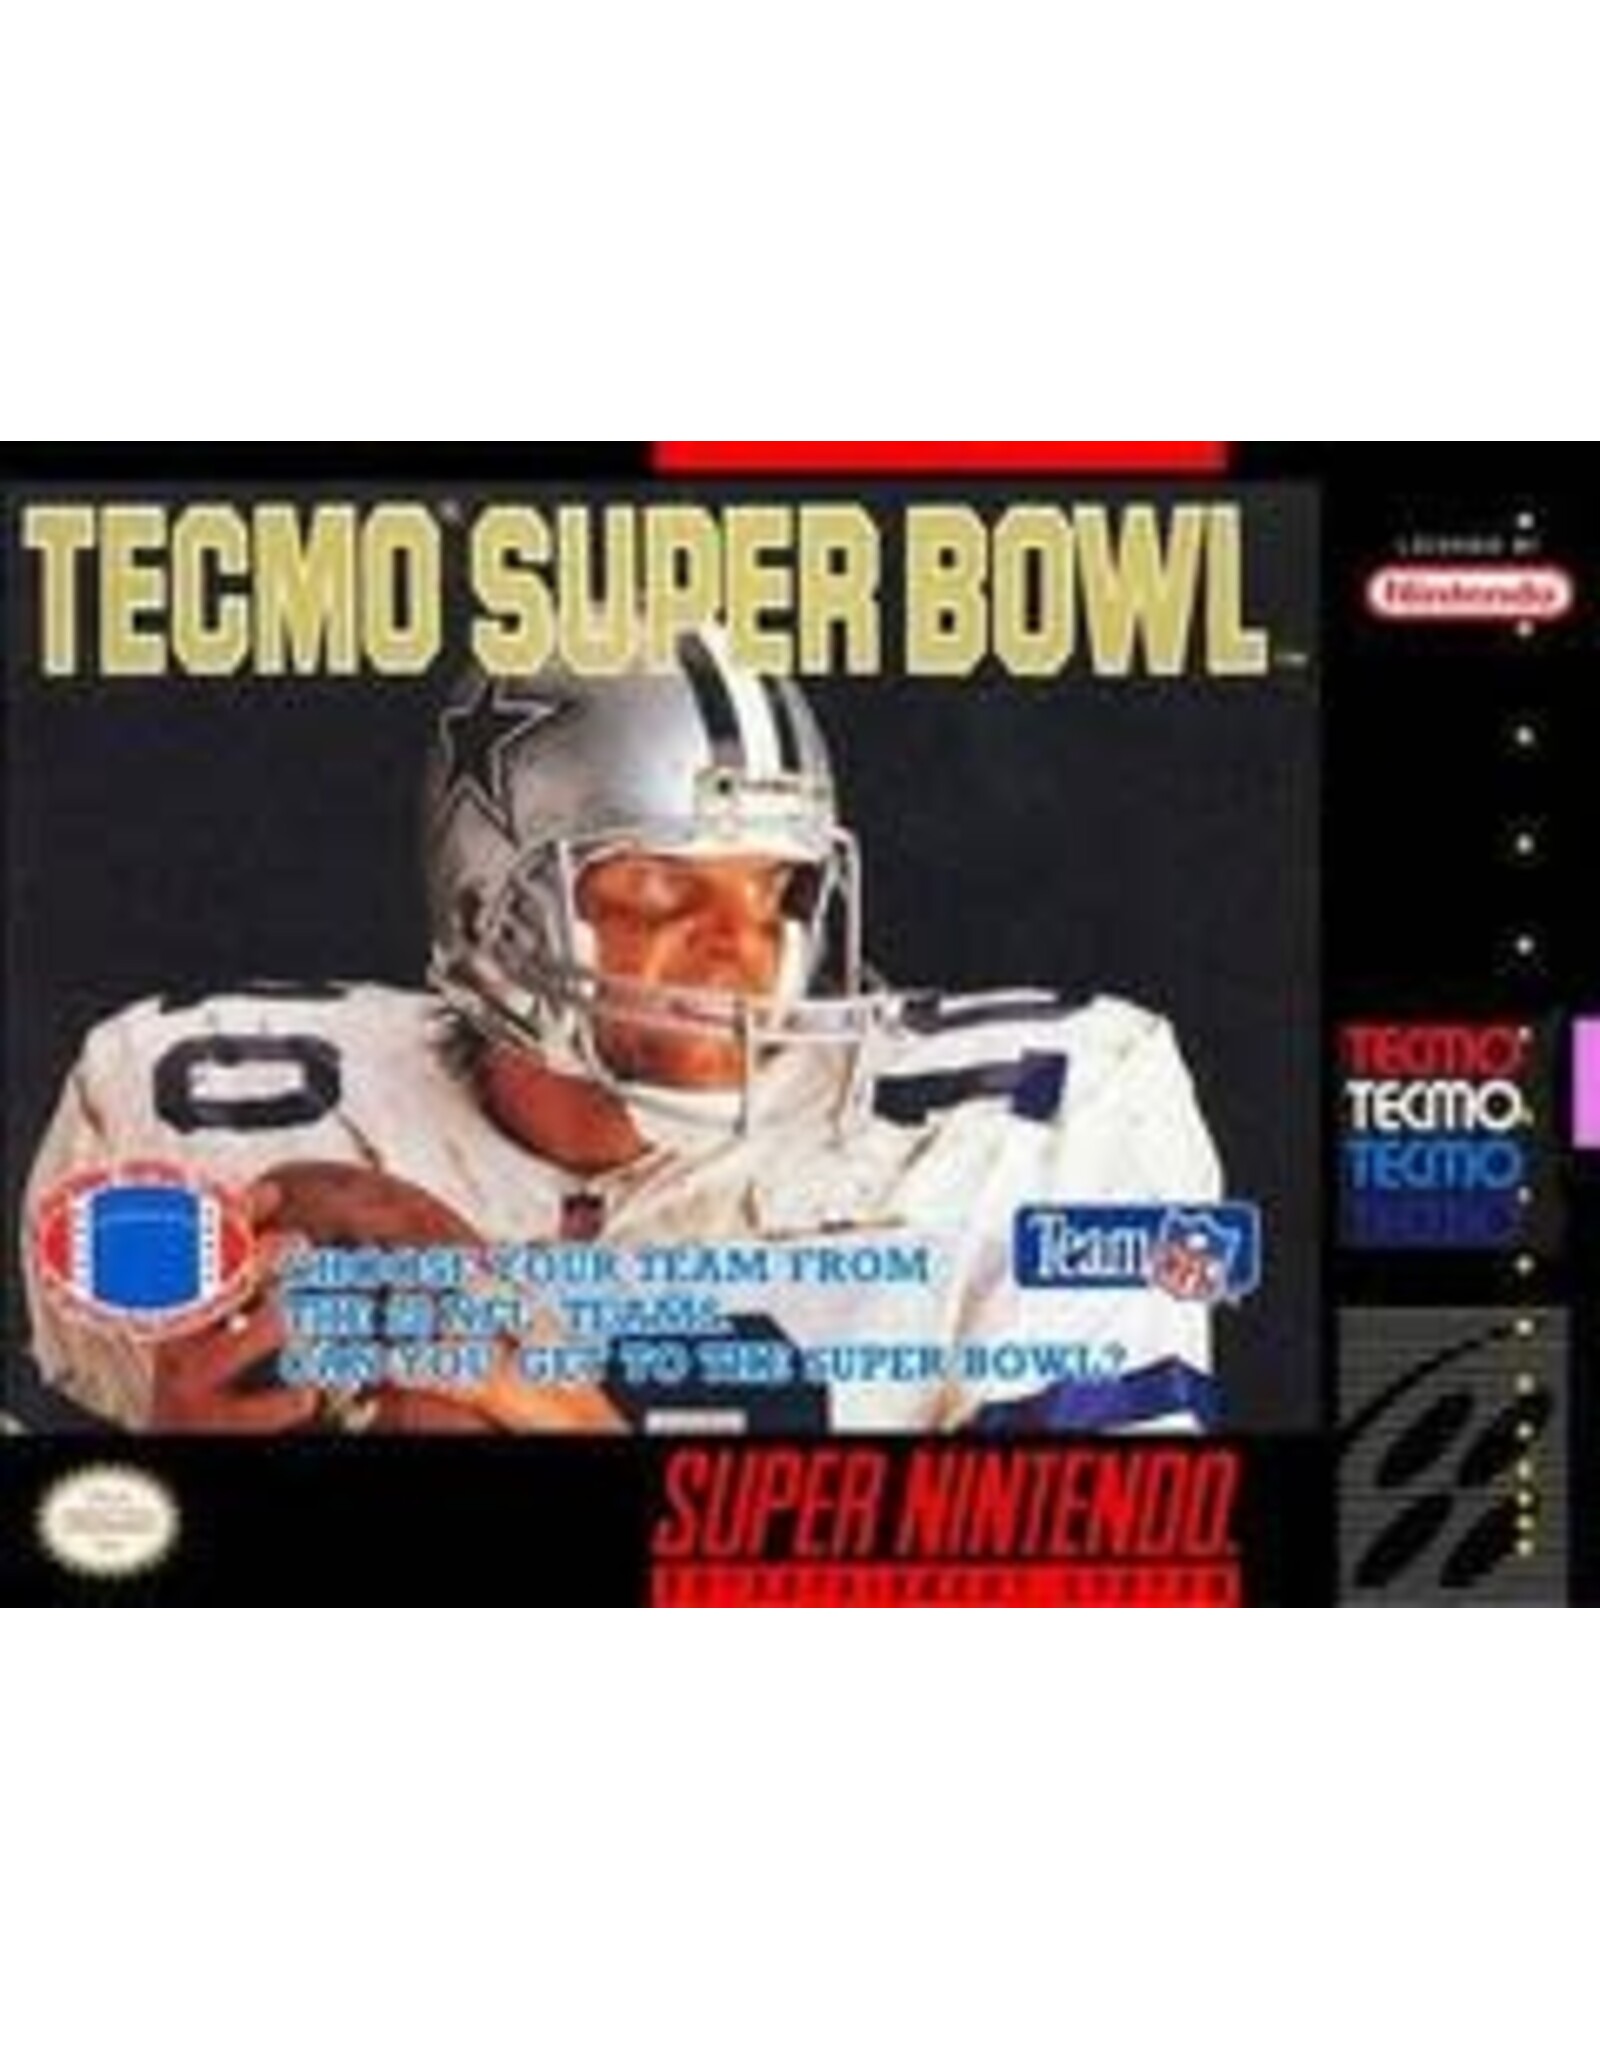 Super Nintendo Tecmo Super Bowl (Used, Cart Only, Cosmetic Damage)